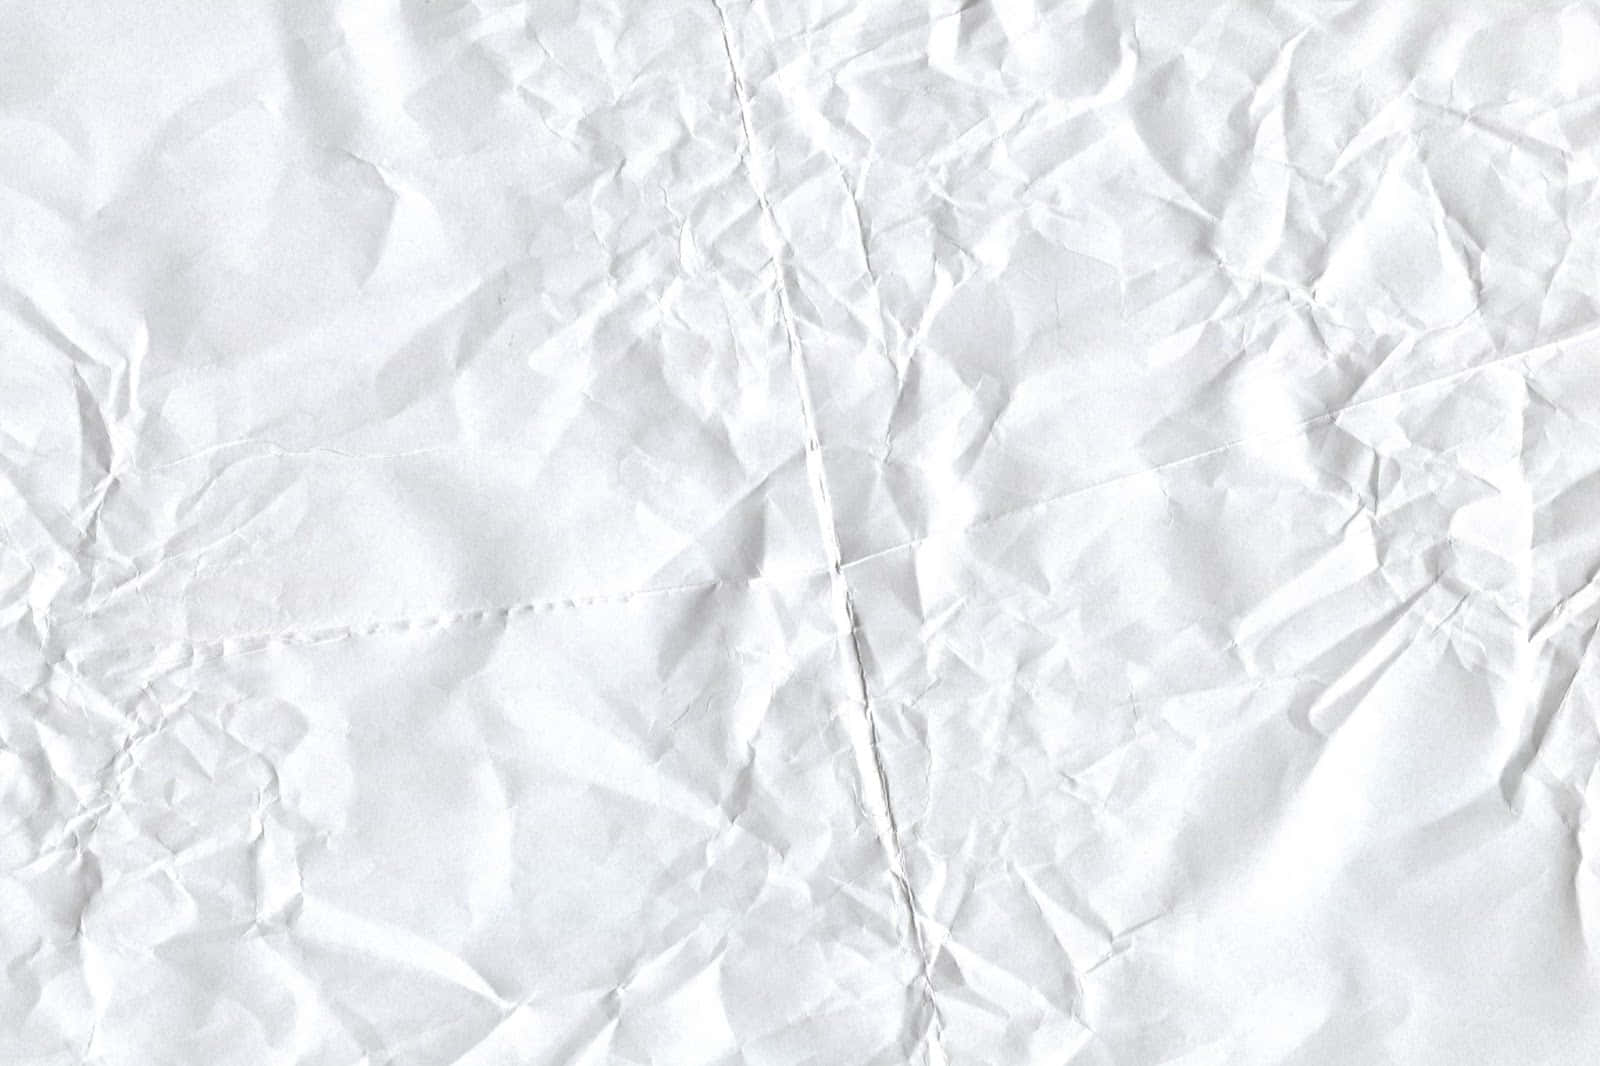 A White Paper With Crumpled Edges